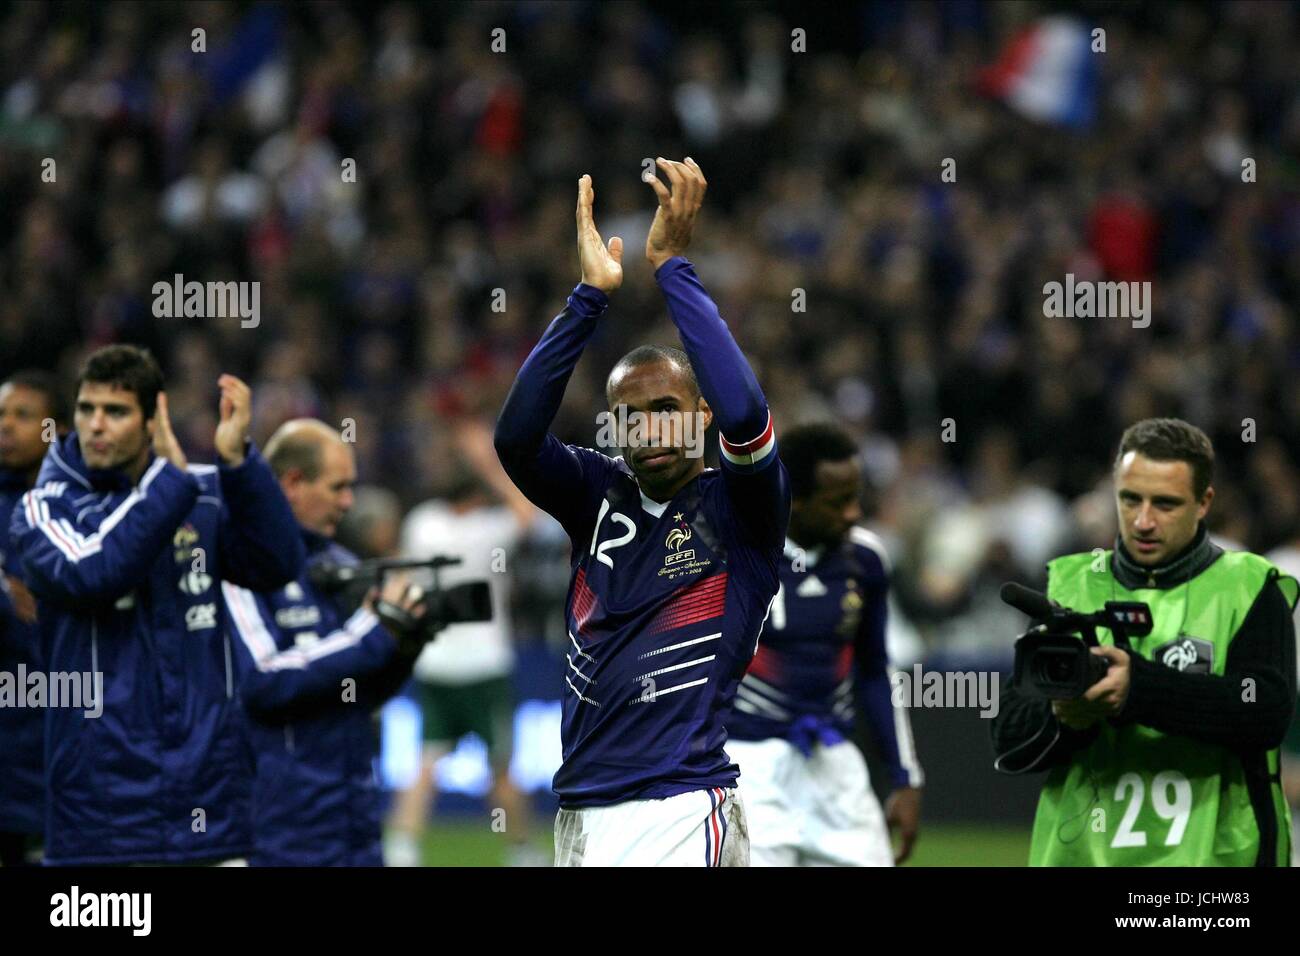 THIERRY HENRY CELEBRTAES FRANCE V REPUBLIC OF IRELAND (UK USE ONLY) FRANCE V IRELAND (UK USE ONLY) STADE DE FRANCE, PARIS, FRANCE 18 November 2009 GAA3953     WARNING! This Photograph May Only Be Used For Newspaper And/Or Magazine Editorial Purposes. May Not Be Used For, Internet/Online Usage Nor For Publications Involving 1 player, 1 Club Or 1 Competition, Without Written Authorisation From Football DataCo Ltd. For Any Queries, Please Contact Football DataCo Ltd on +44 (0) 207 864 9121 Stock Photo